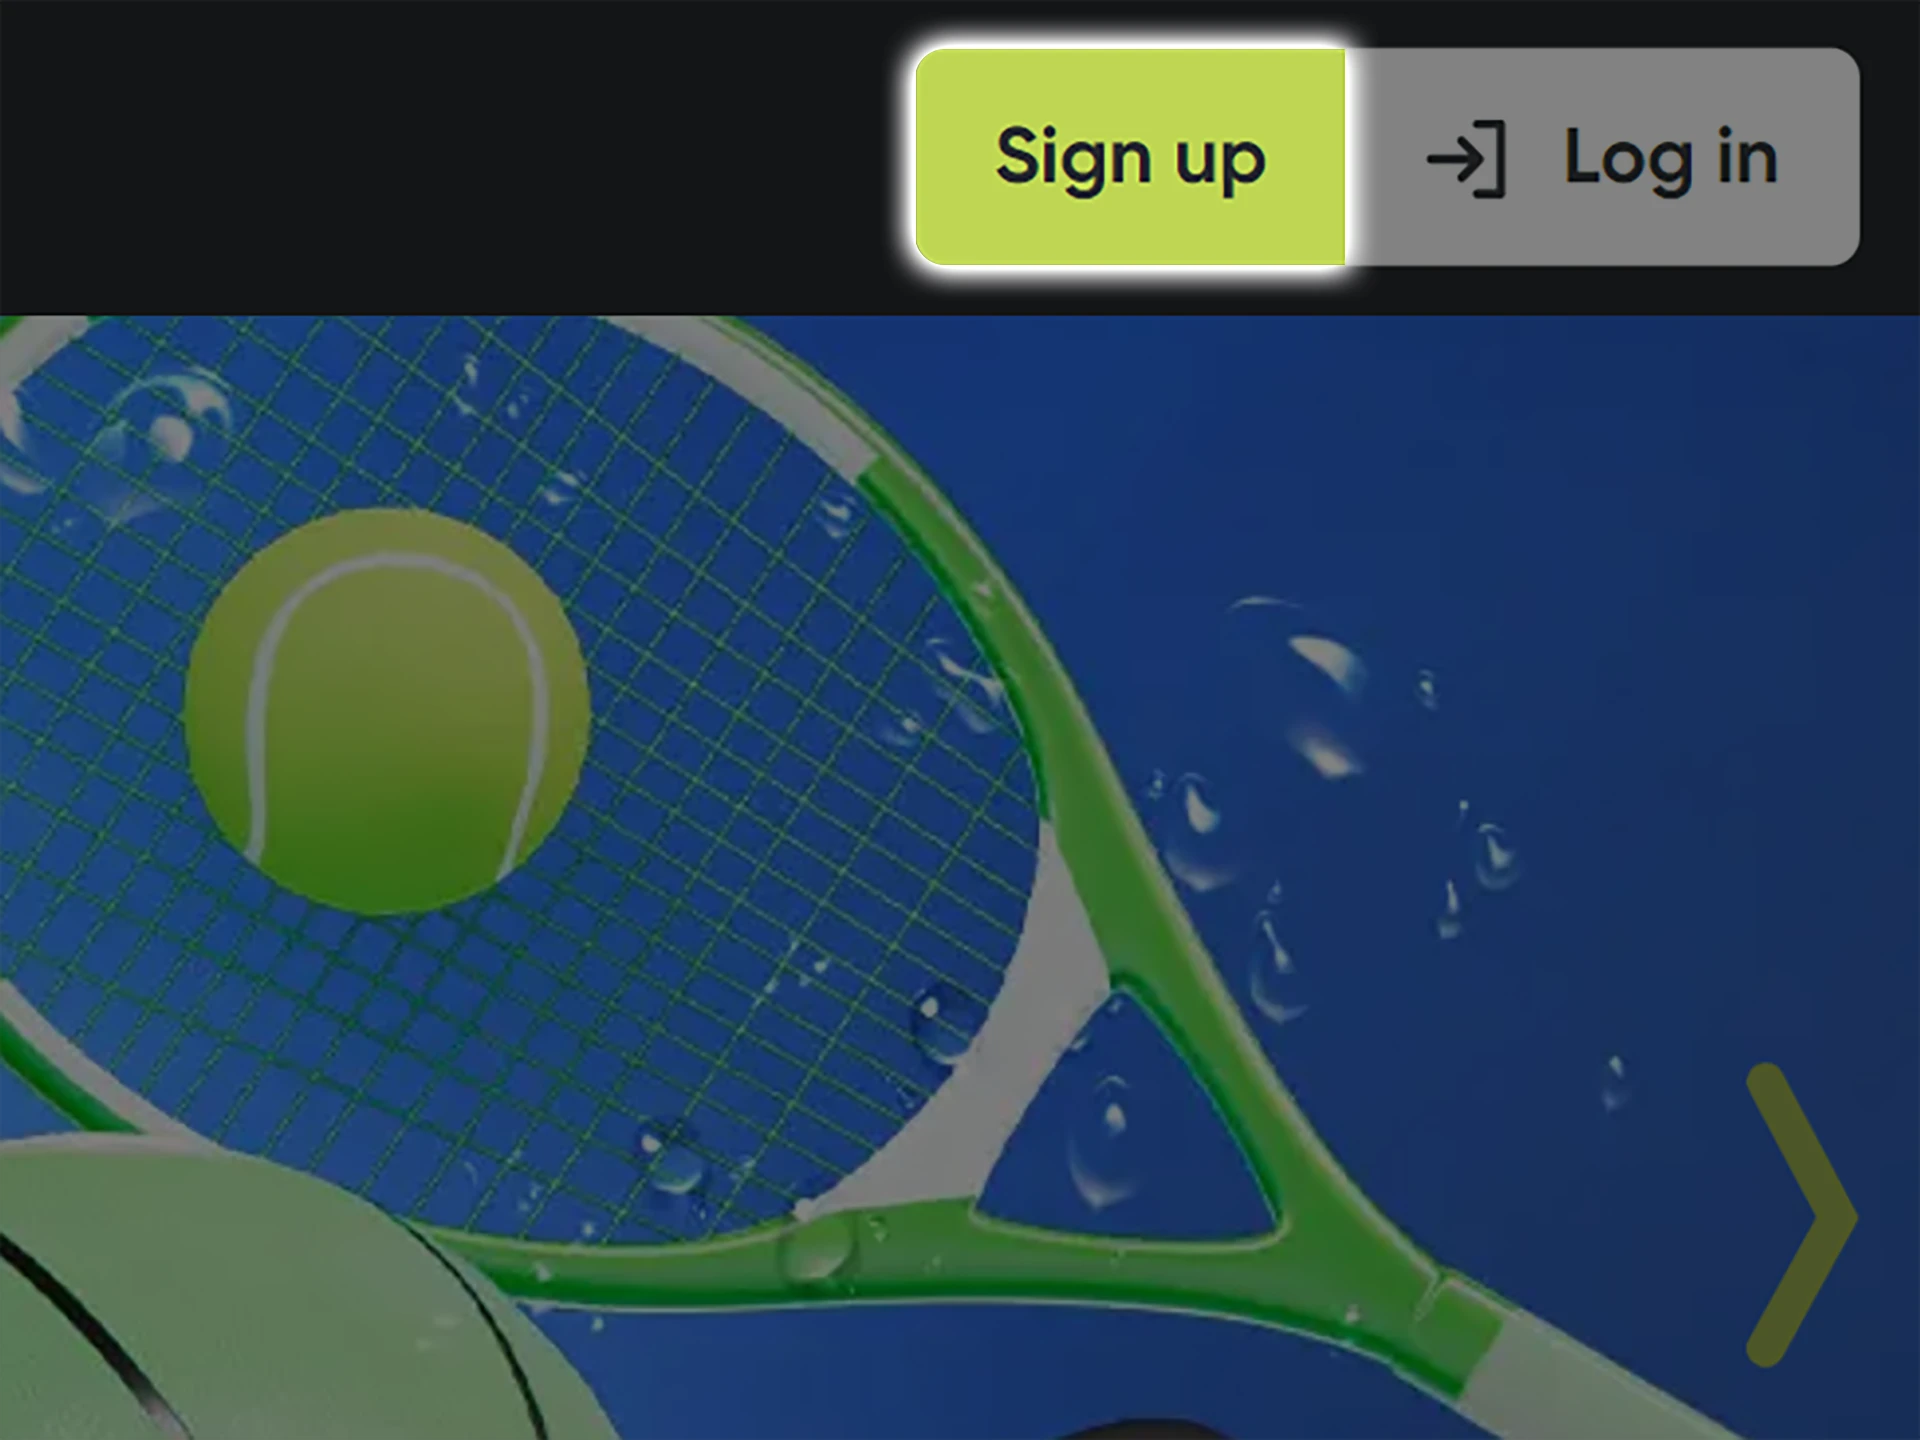 To open the Fresh Casino registration form, click the sign up button.